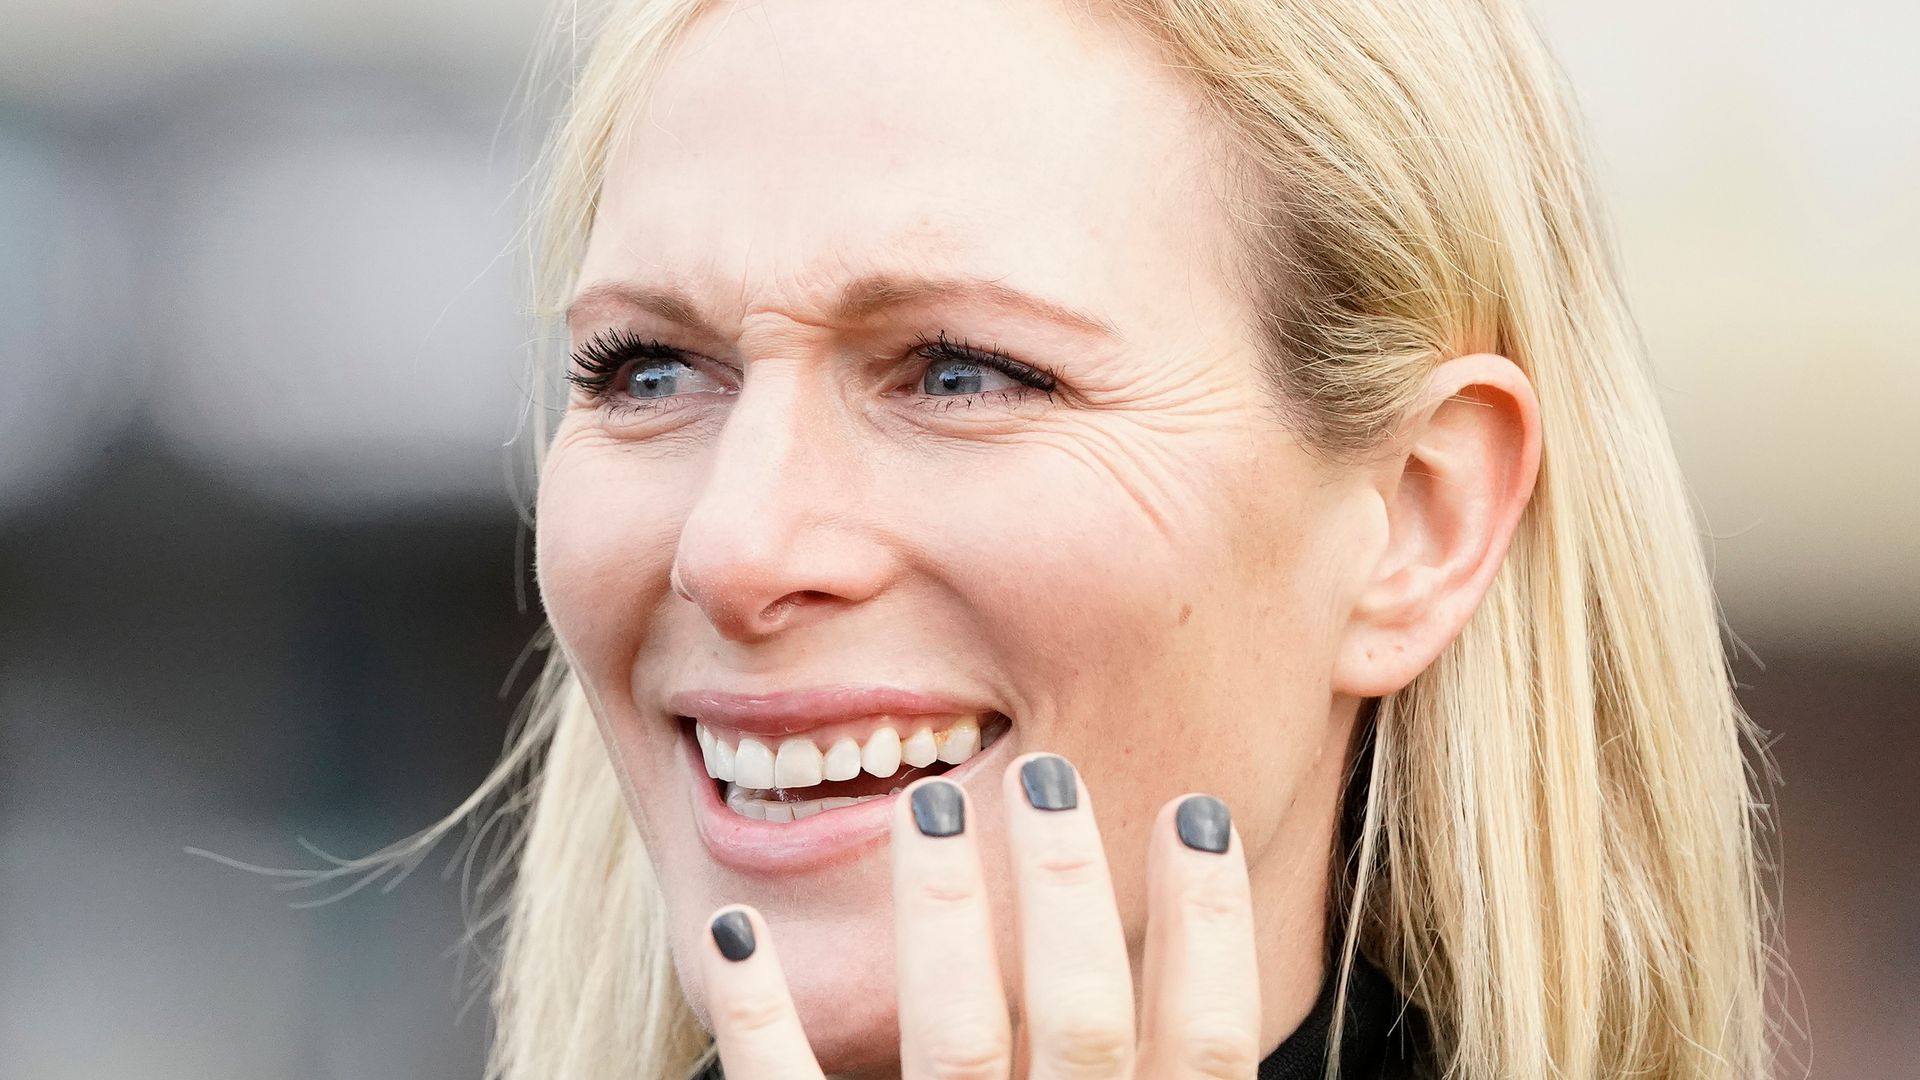 Zara Tindall showing her engagement ring and another wedding band